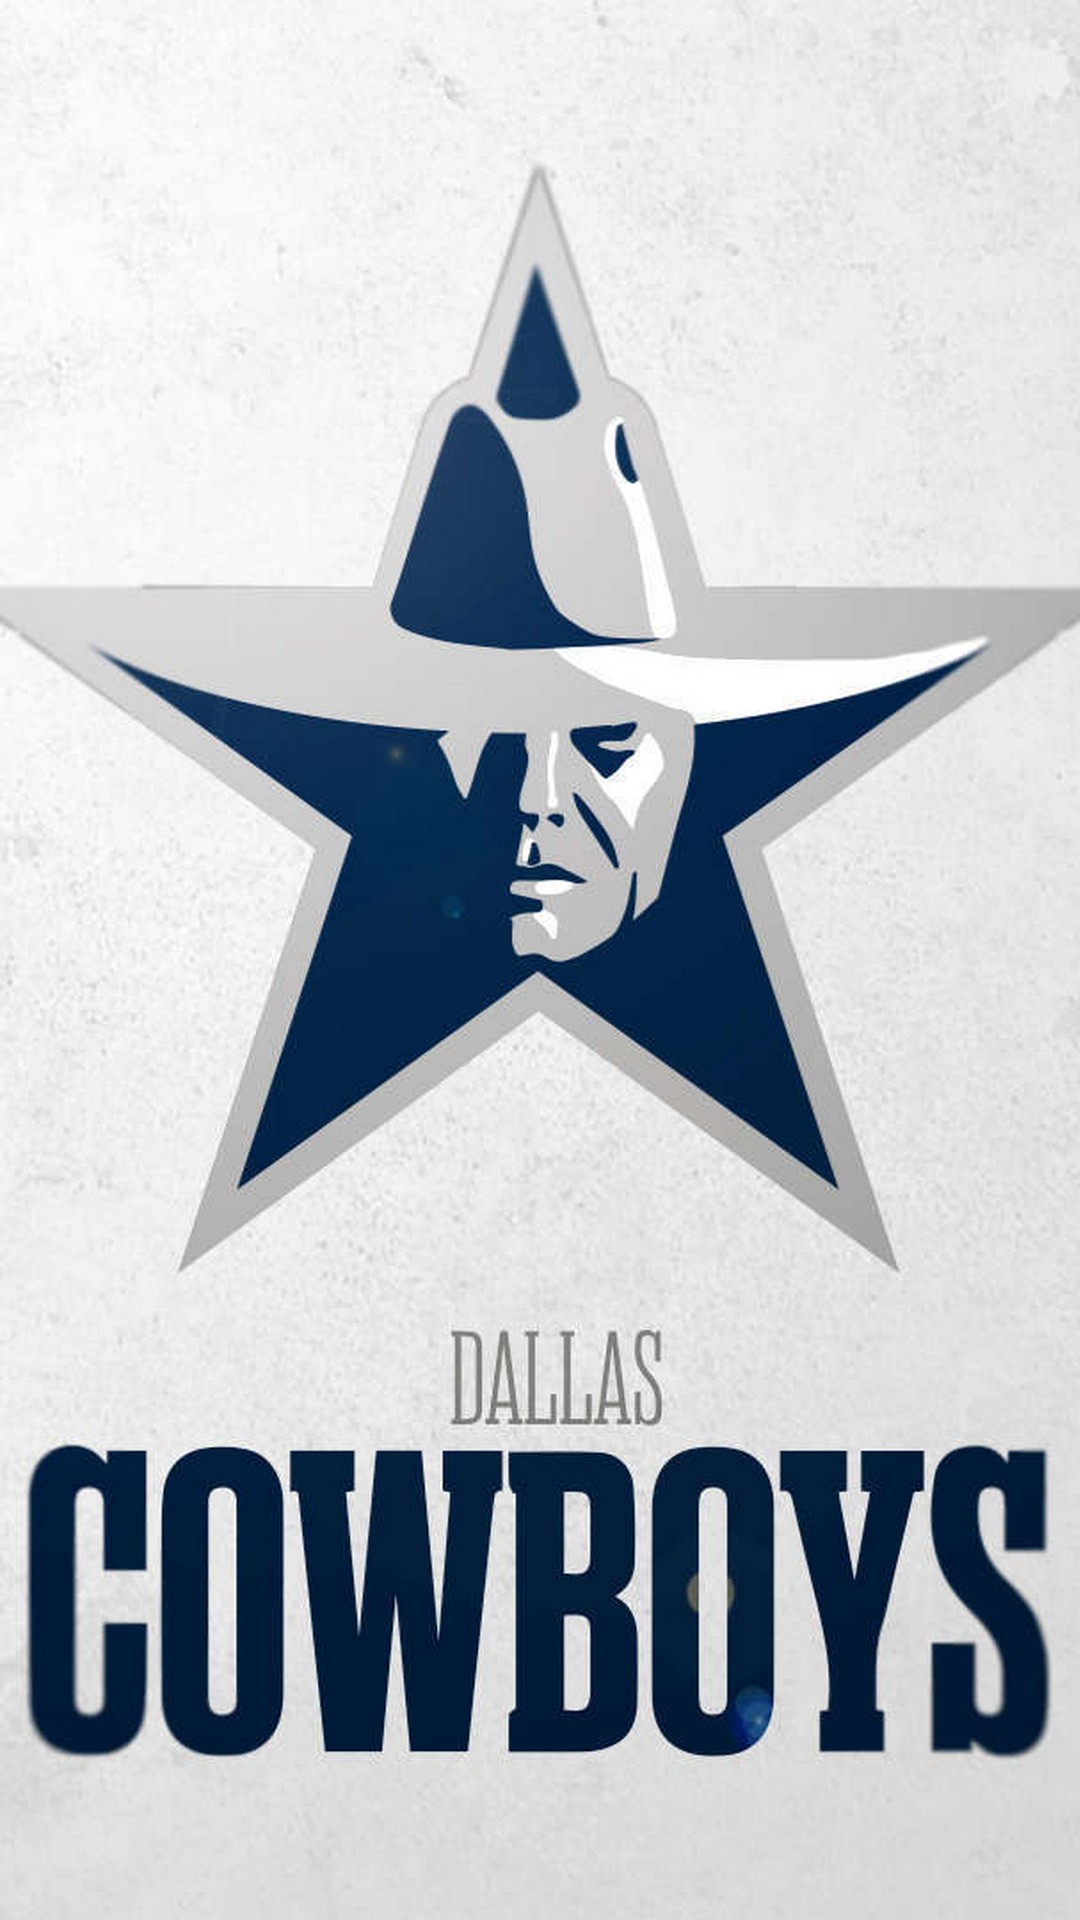 Dallas Cowboys iPhone 6 Plus Wallpaper With high-resolution 1080X1920 pixel. Download and set as wallpaper for Apple iPhone X, XS Max, XR, 8, 7, 6, SE, iPad, Android